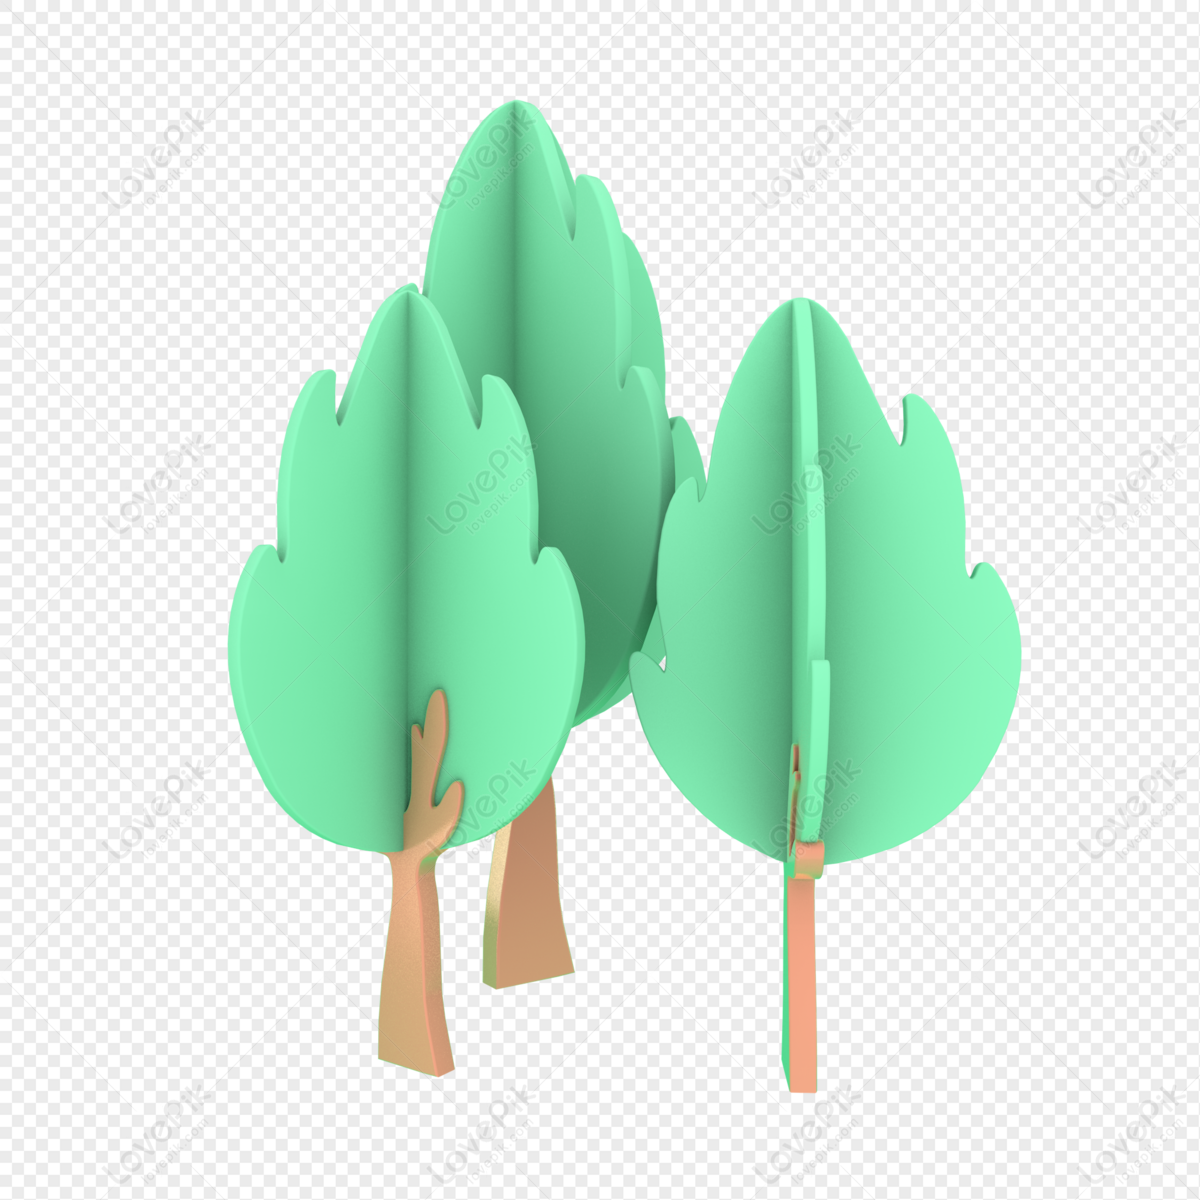 Green Tree Material Floating Element PNG Image Free Download And Clipart  Image For Free Download - Lovepik | 401510821